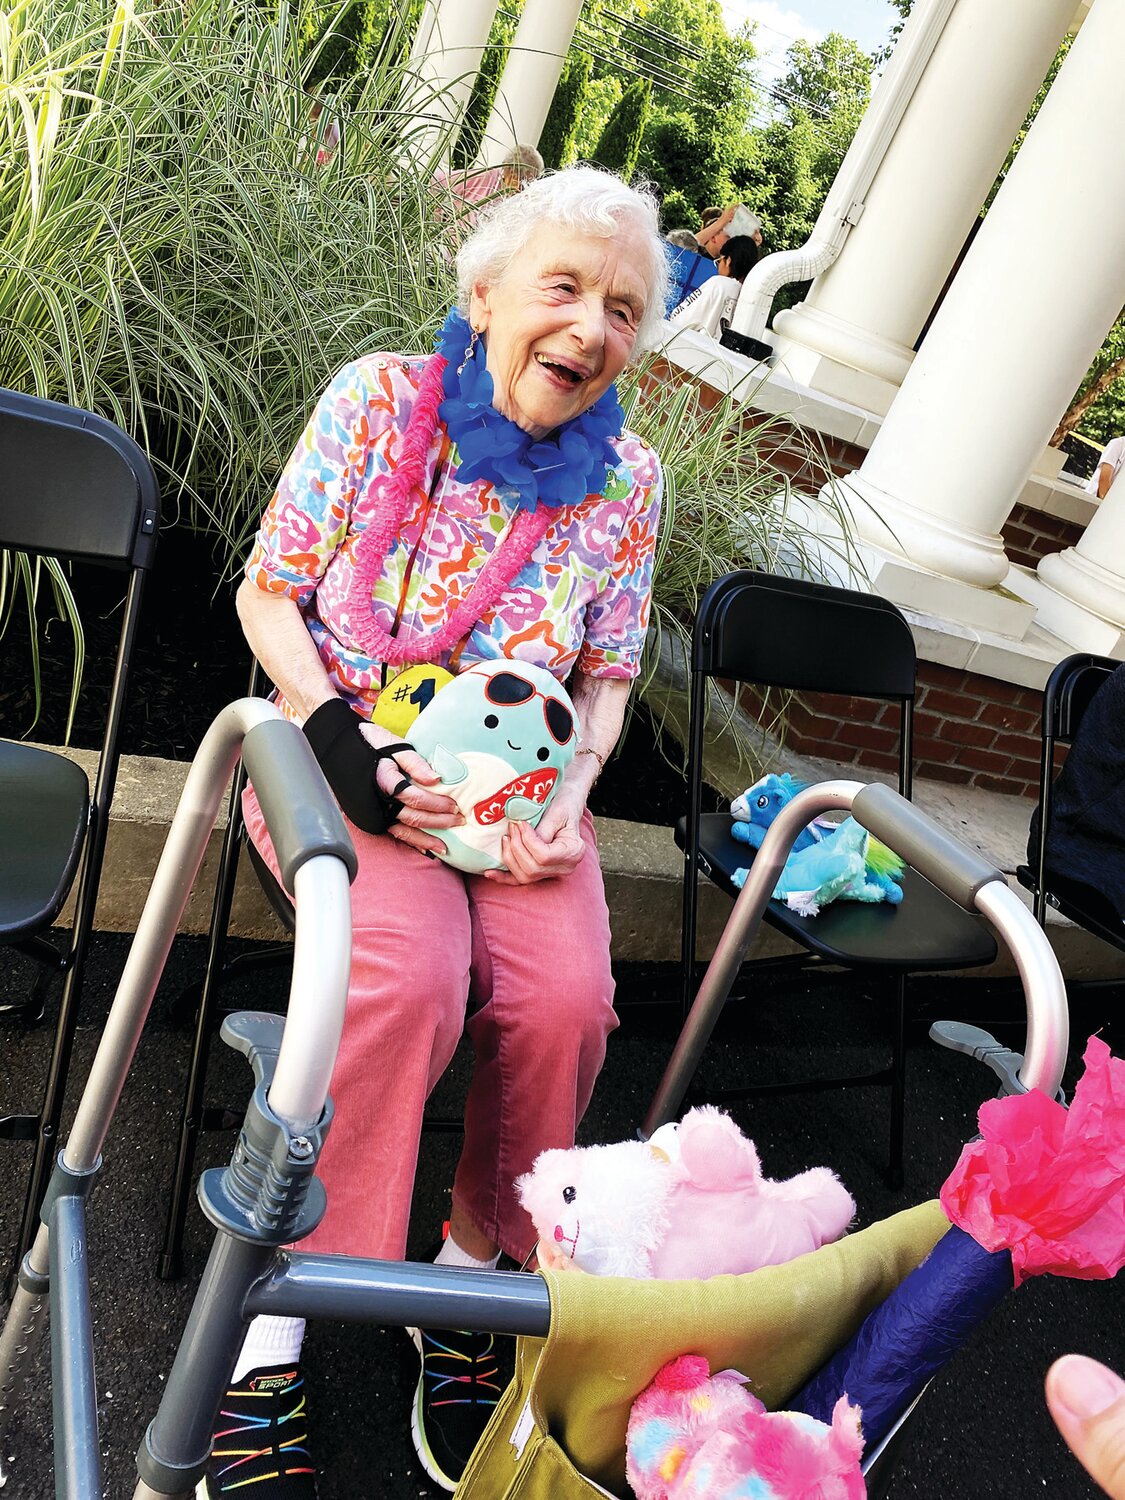 A Bridges at Warwick resident has fun at an intergenerational carnival attended by seniors and fifth graders from Jamison Elementary School.